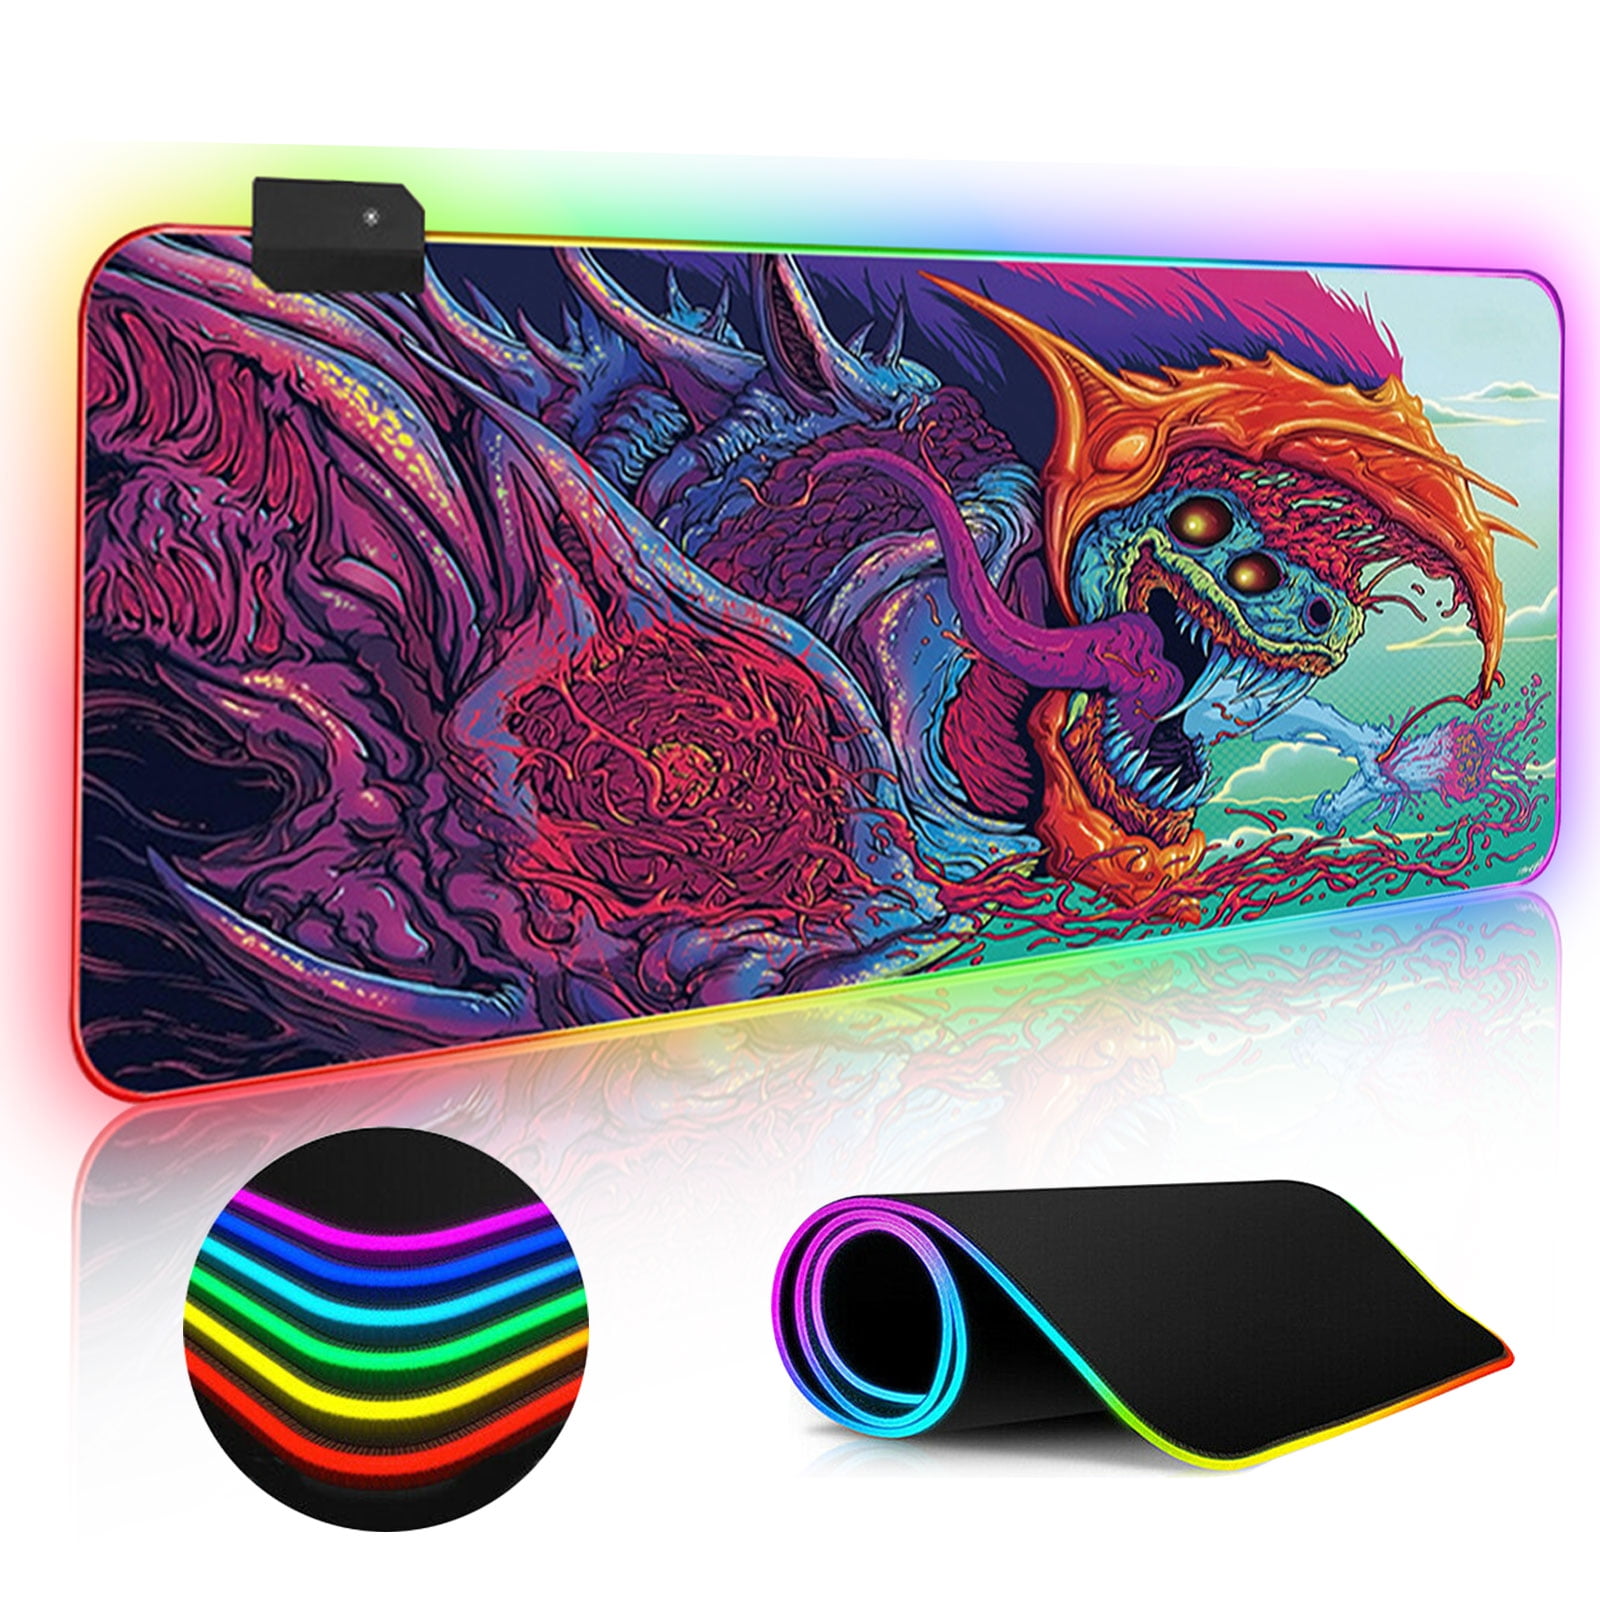 Large Extended Soft Led Mouse Mat with 14 Lighting Modes 2 Brightness Levels Keyboard Mousepad RGB Gaming Mouse Pad 31.5 x 11.8 x 0.2 Inch Universe Non-Slip Rubber Base Waterproof Surface 